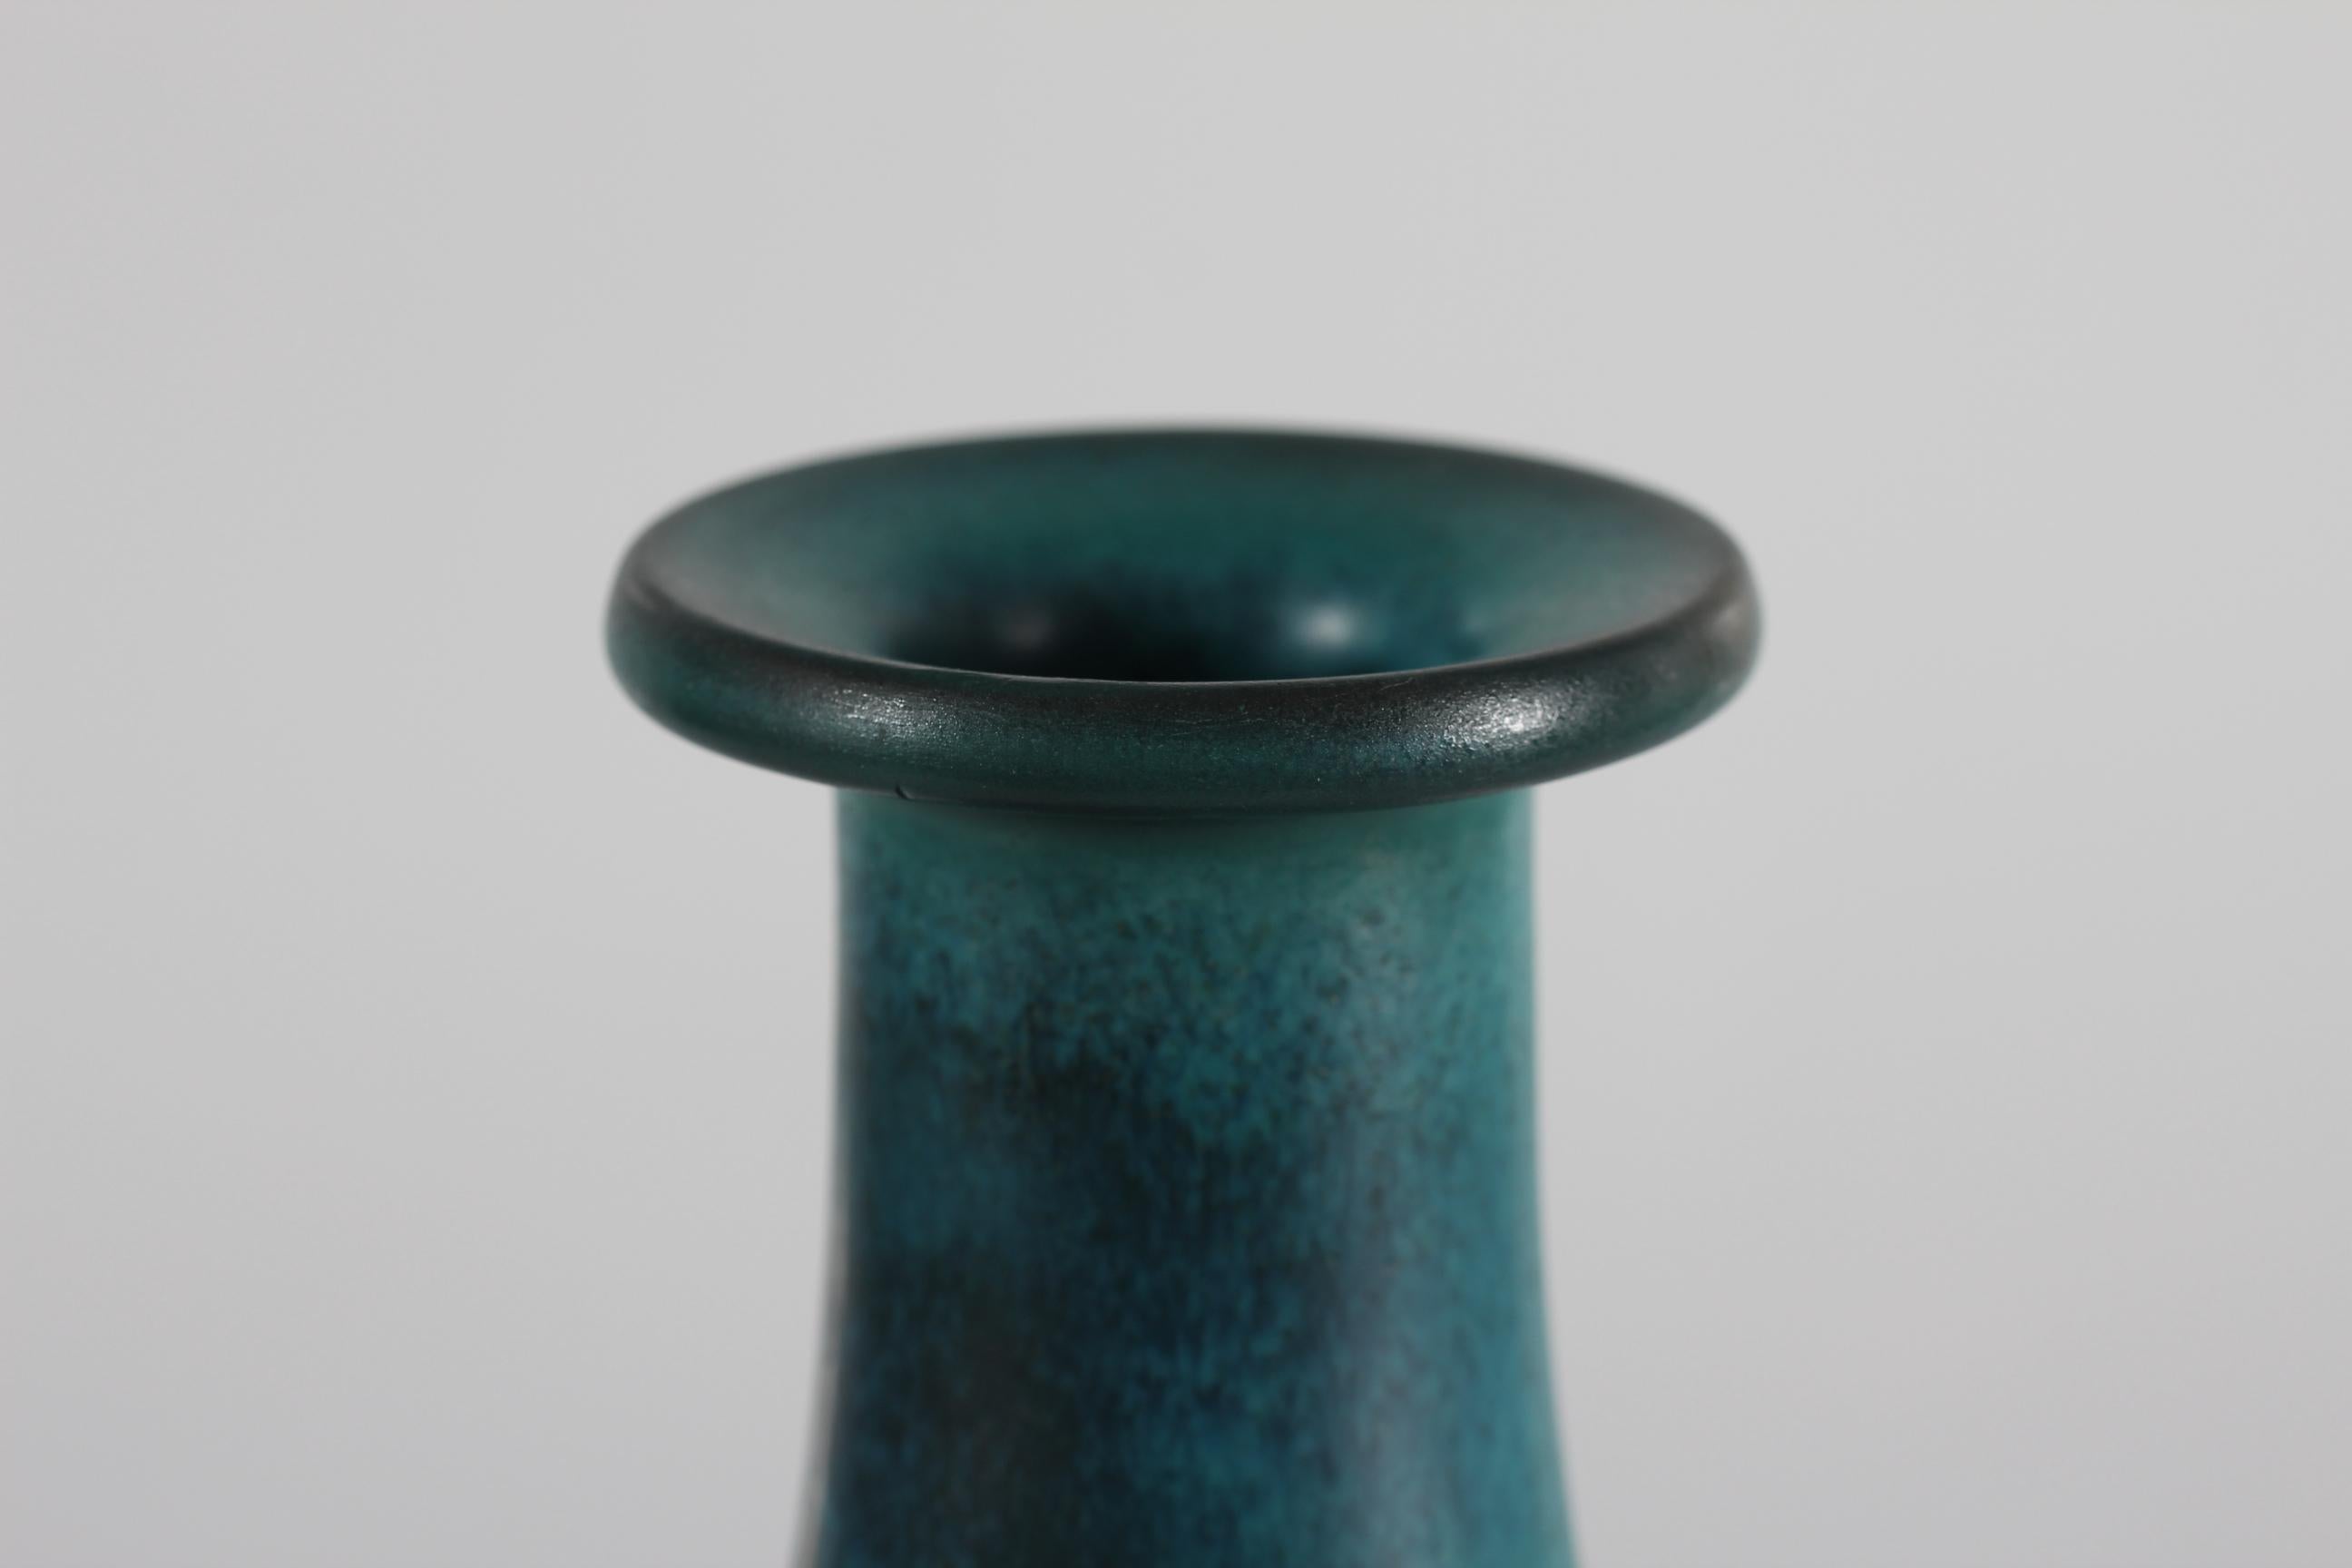 This very tall and slender vase was designed by Gunnar Nylund for Nymølle and produced in Denmark, circa 1960´s. It has a vivid blue green glaze over a radiating pattern. Measure: 17.7” Tall.

The vase is a first edition and in very good vintage